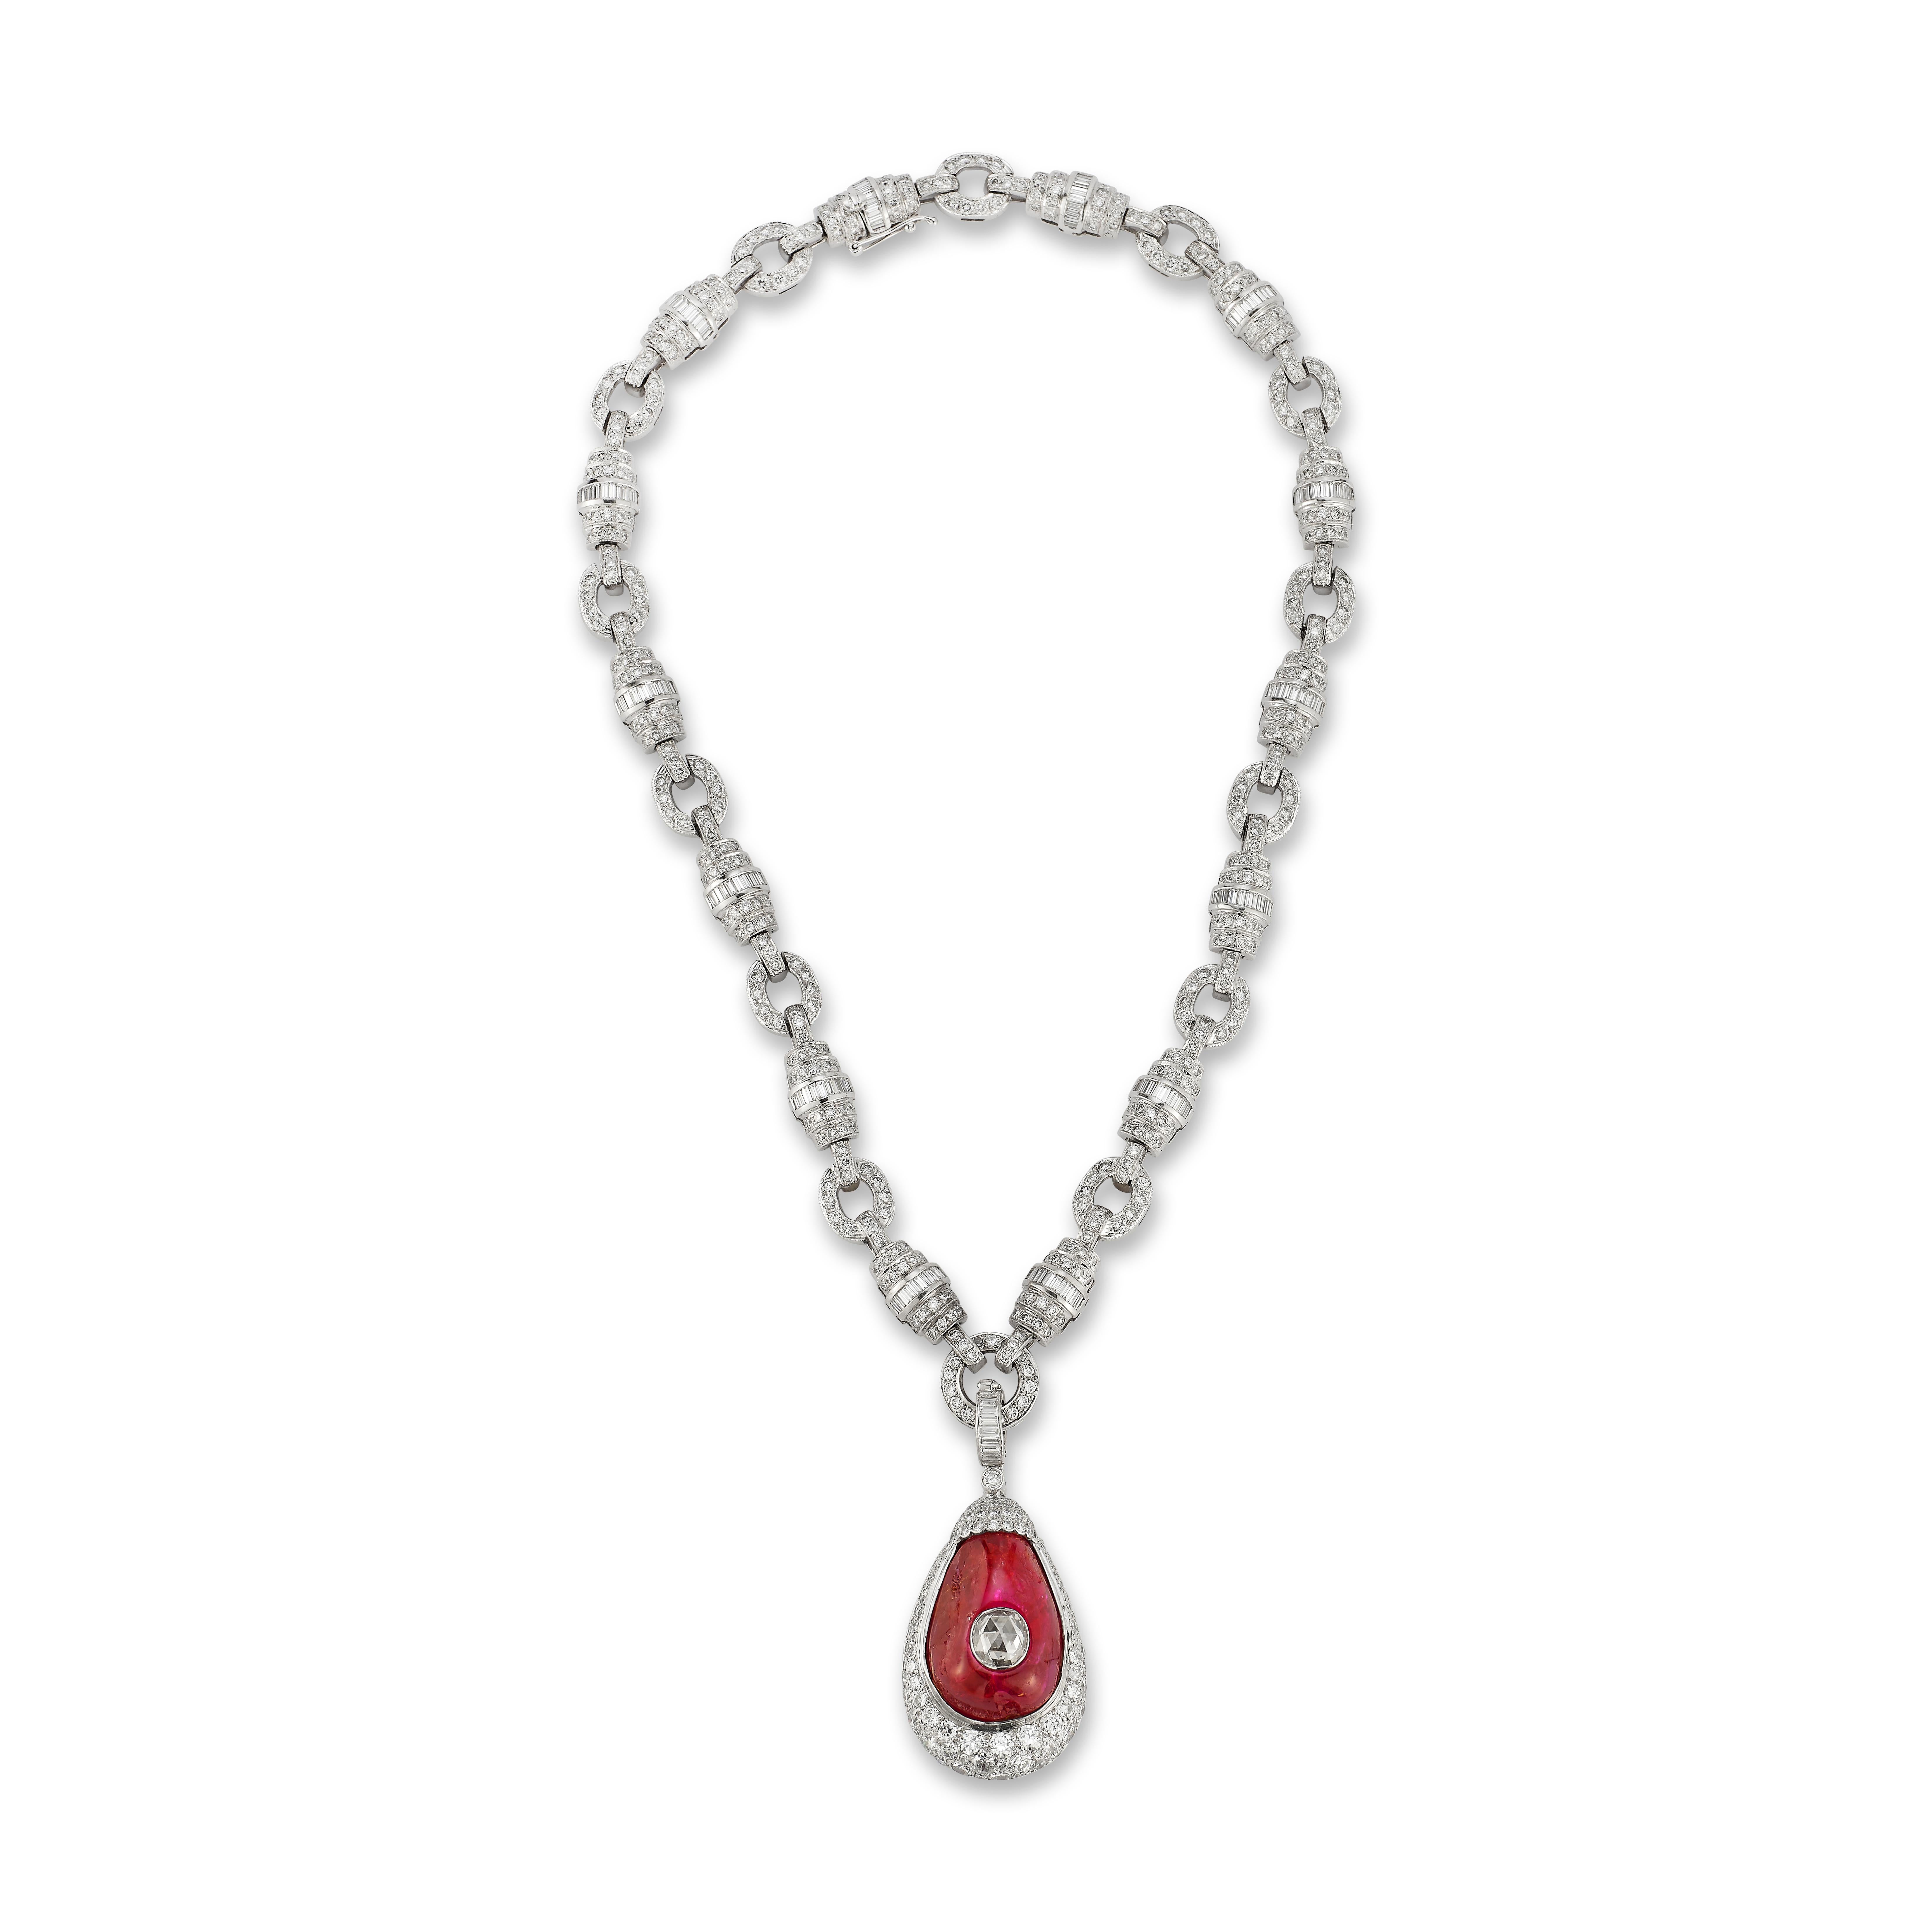 Ruby & Diamond Drop Necklace

A large cabochon ruby drop weighing approximately 53 carats, with a rose cut diamond weighing approximately 1.58 carats set inside the ruby!  Suspended from A 18 karat white gold chain set with brilliant and baguette